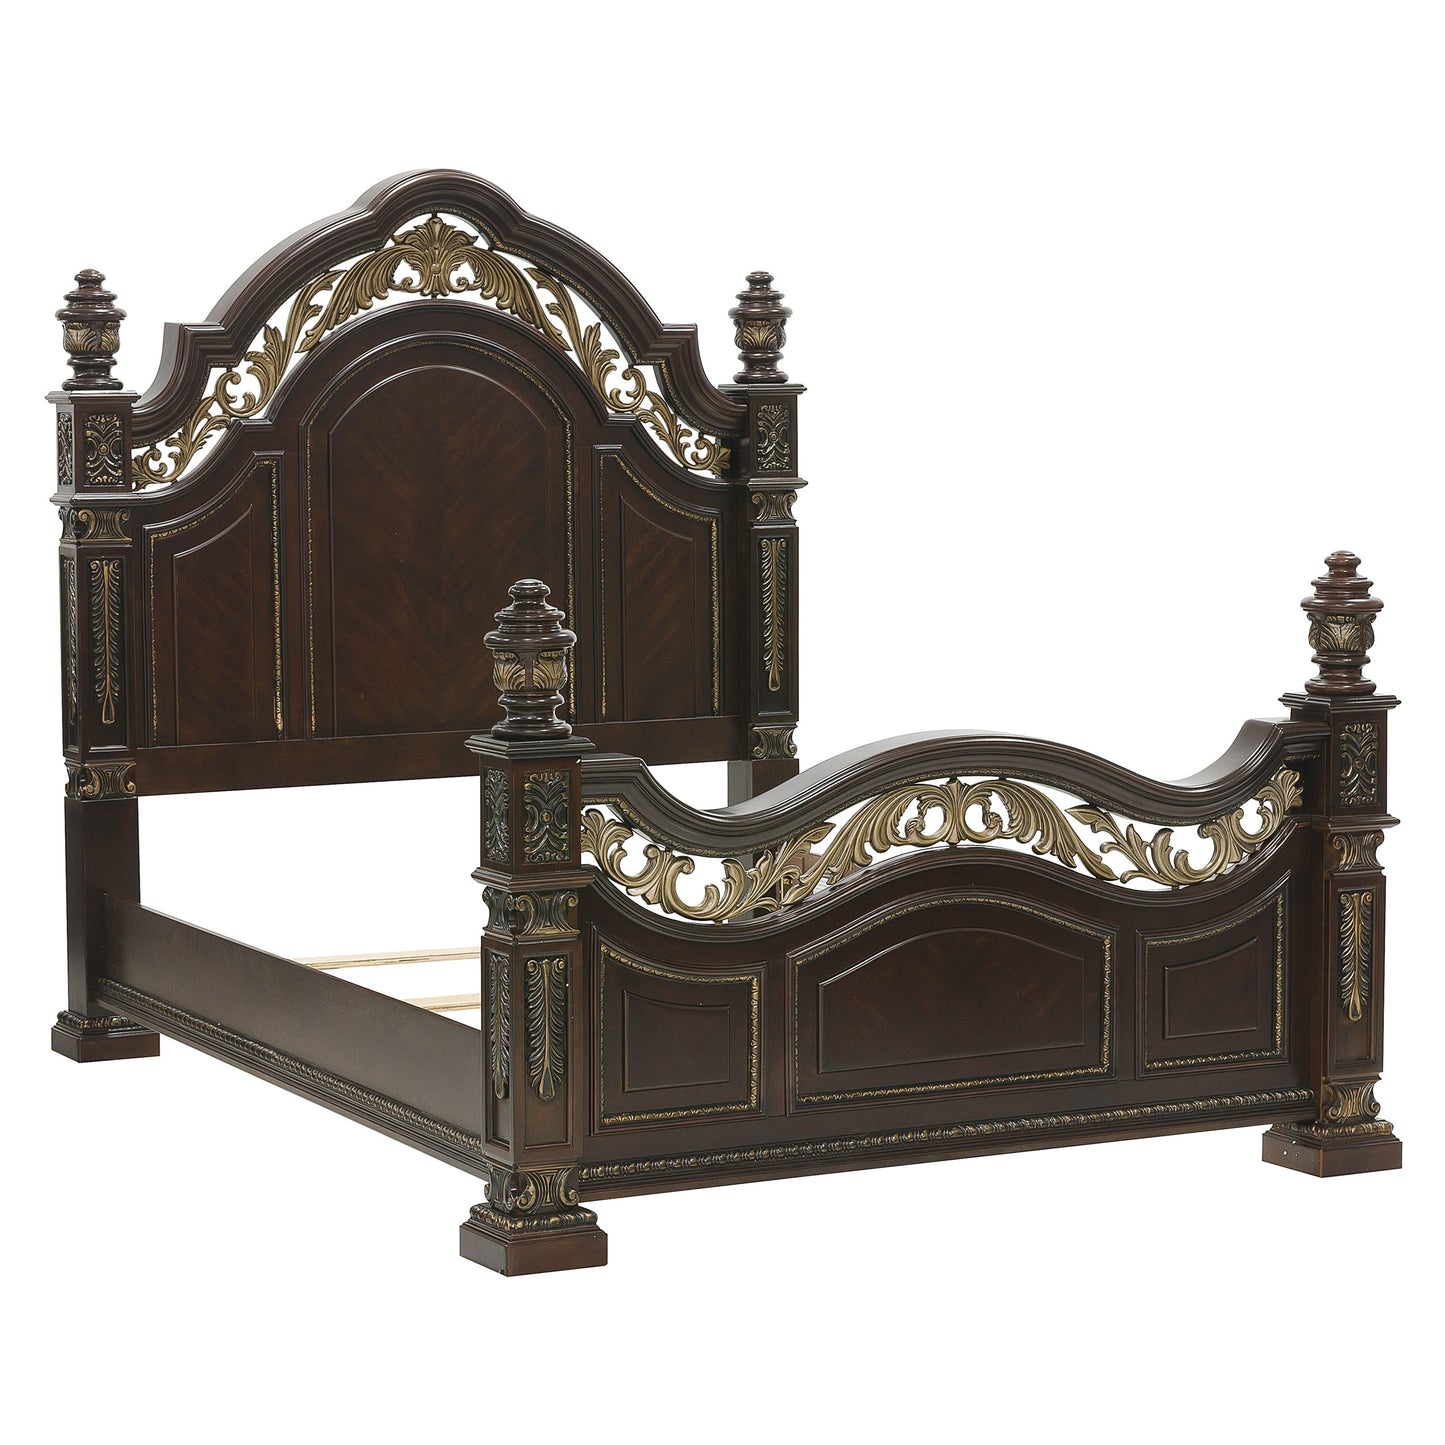 Homelegance Catalonia Queen Bed In Brown